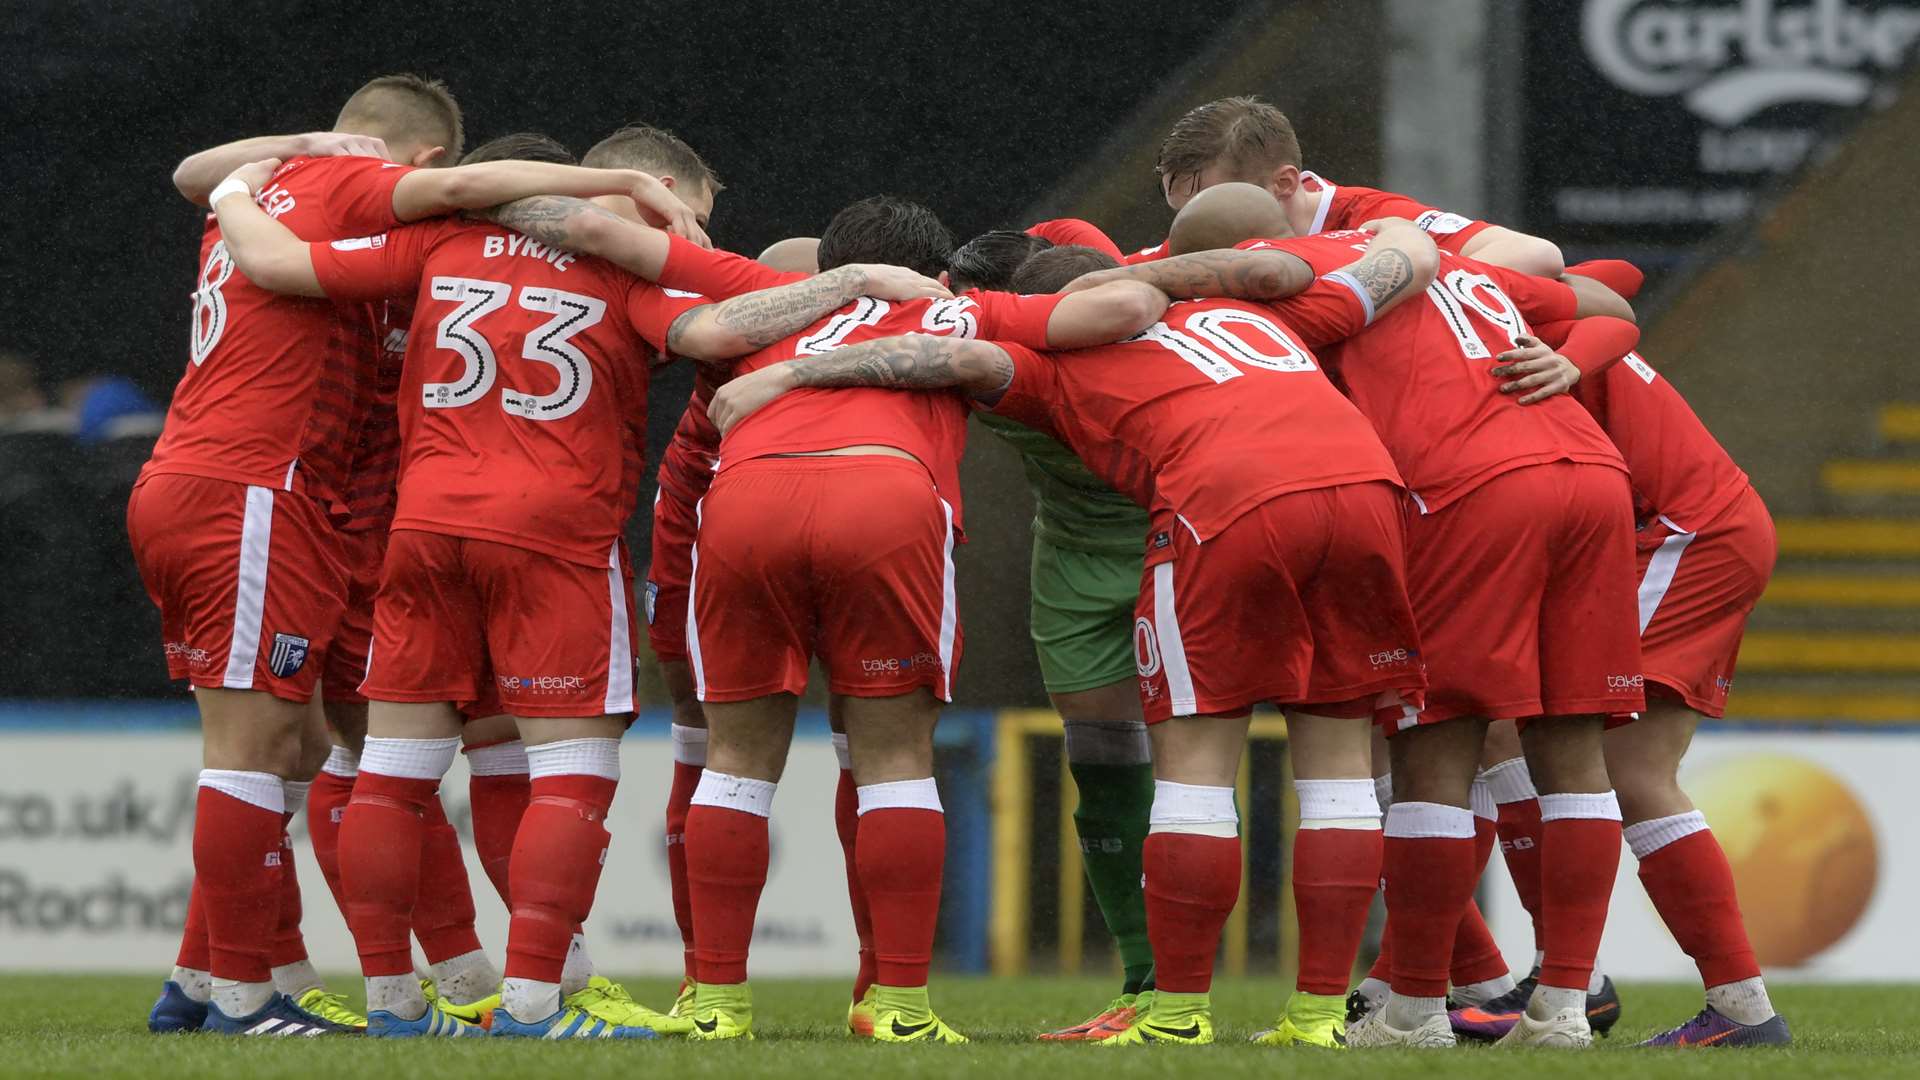 Final words of encouragement in the pre-match huddle Picture: Barry Goodwin